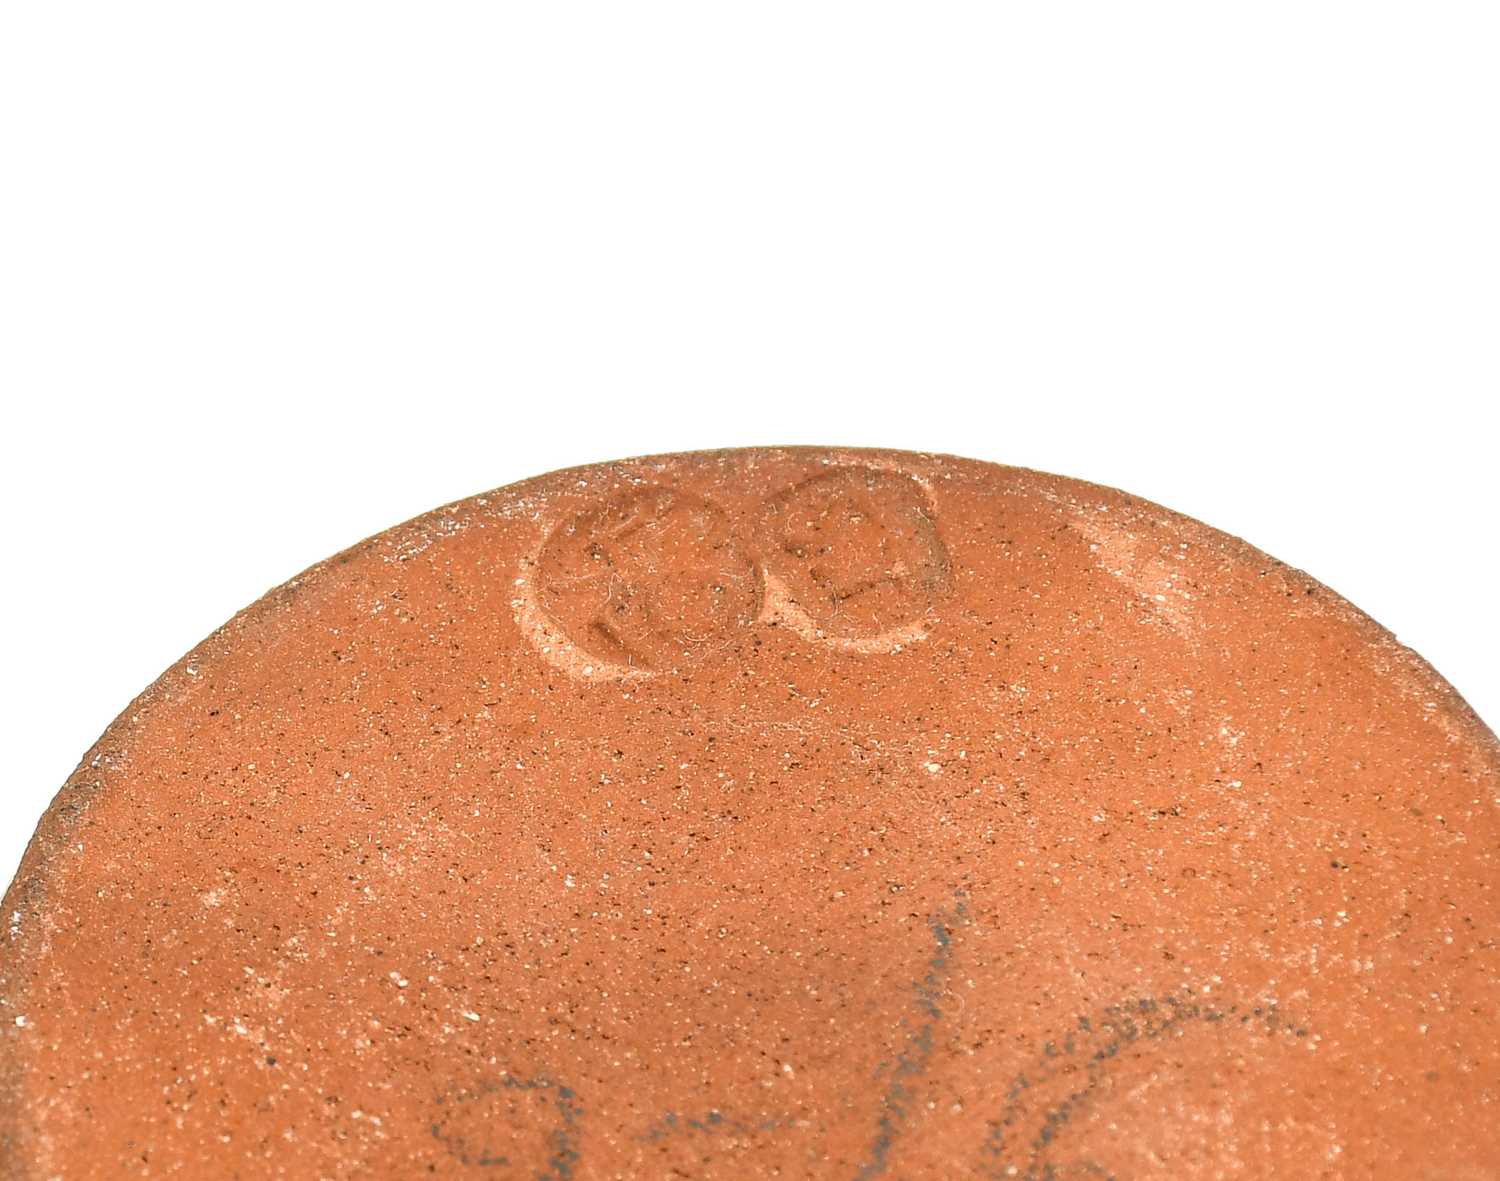 Raymond (Ray) Finch (1914-2012) for Winchcombe Pottery: A Stoneware Vase, covered in a tenmoku glaze - Image 3 of 3